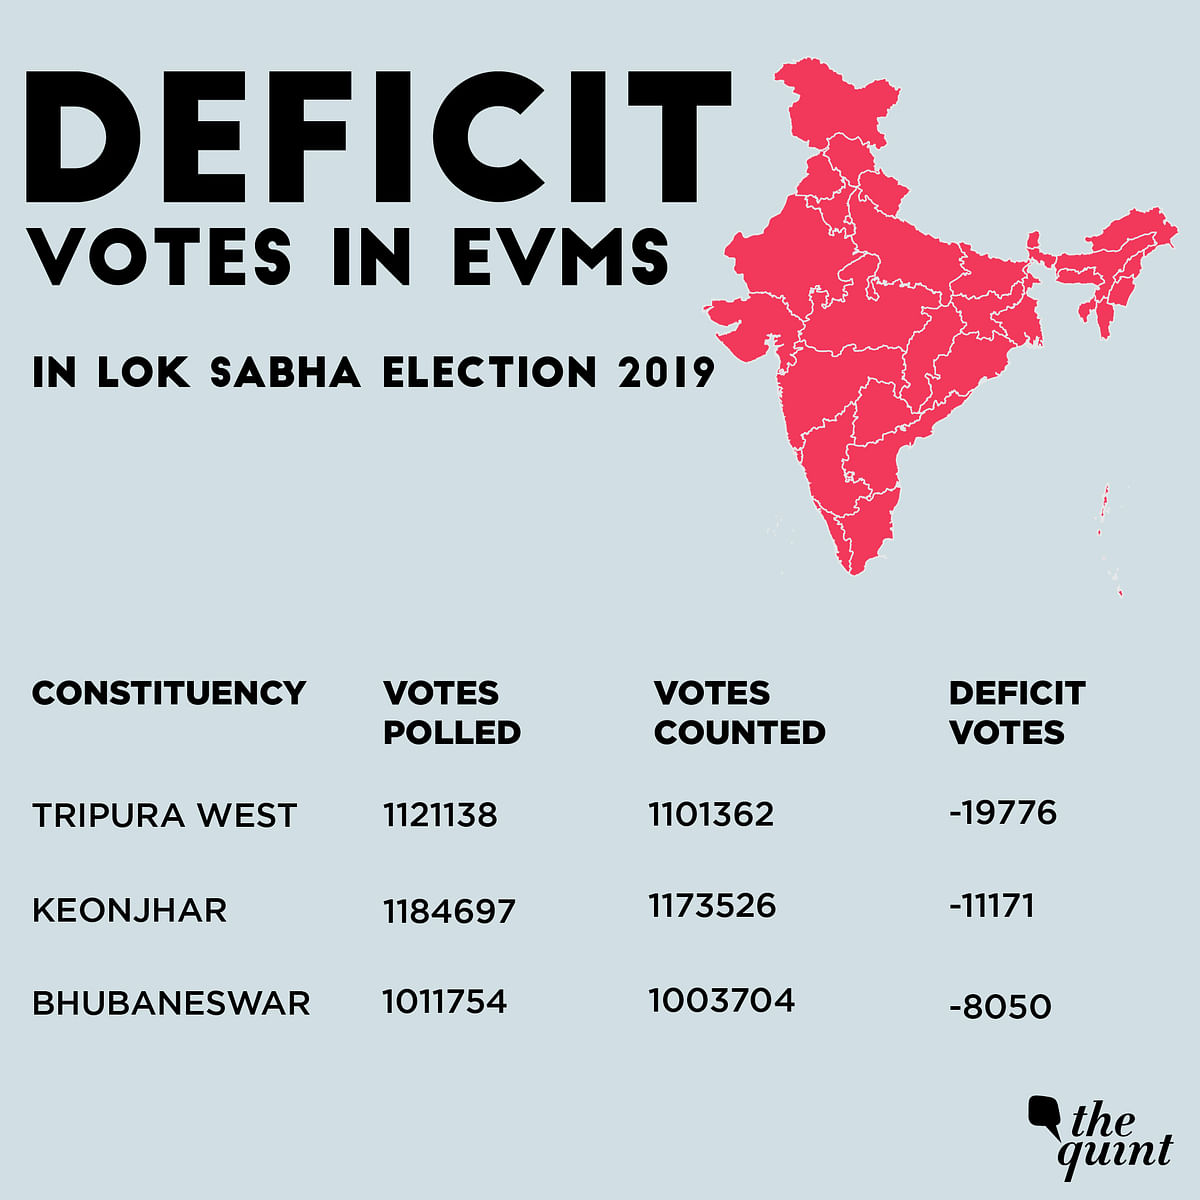 Exclusive: Mismatch in votes polled & counted in EVMs in multiple Parliamentary constituencies in LS Election 2019.